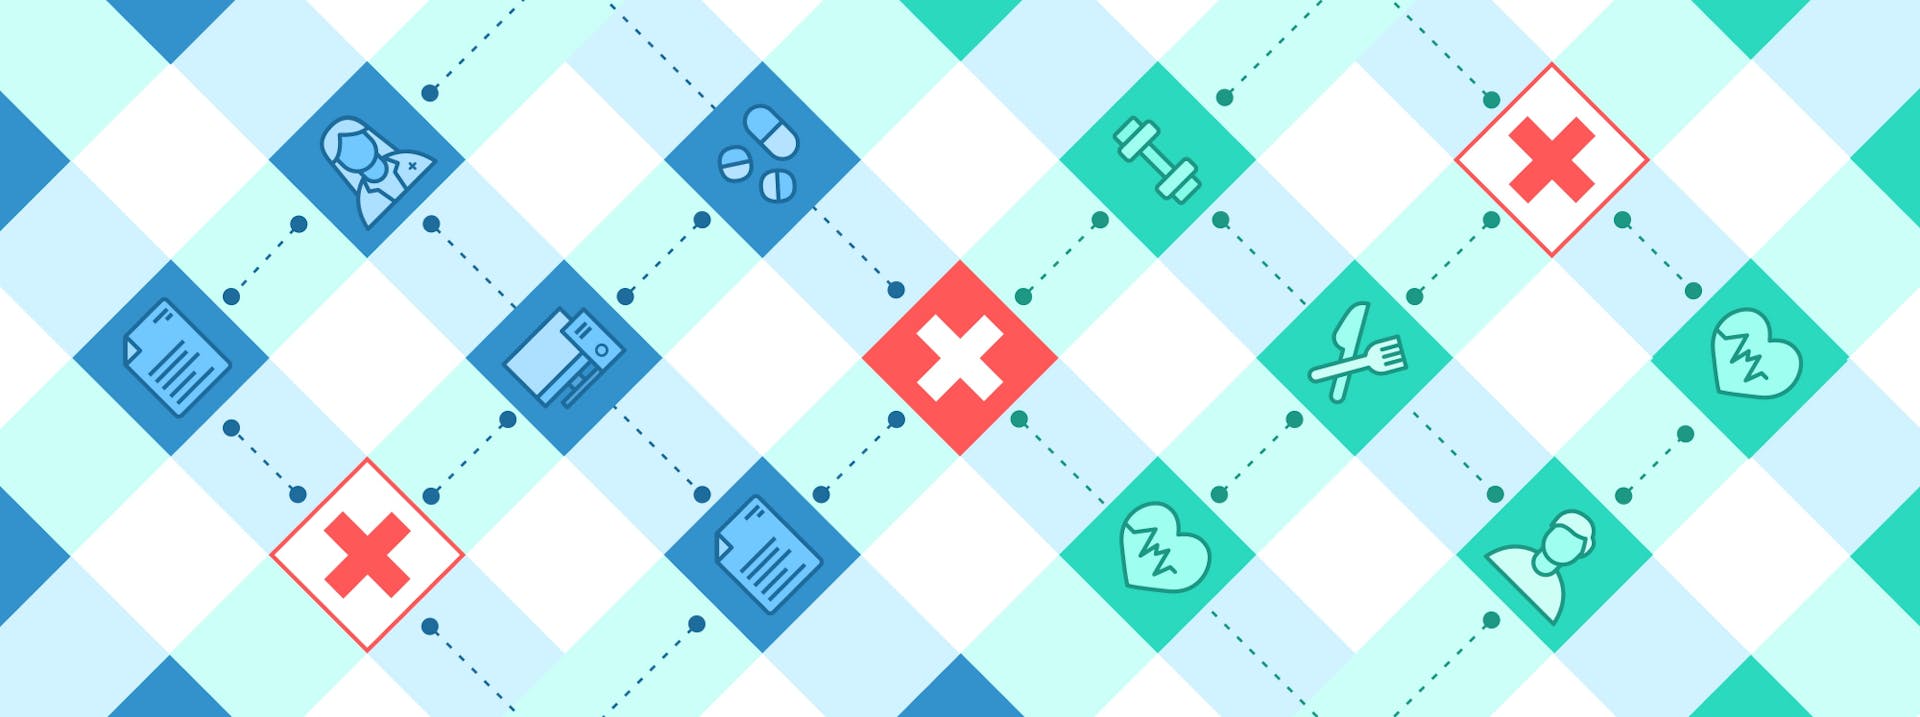 Illustration of a blue and green grid with icons in the squares related to health including doctors, red crosses and an ECG diagram